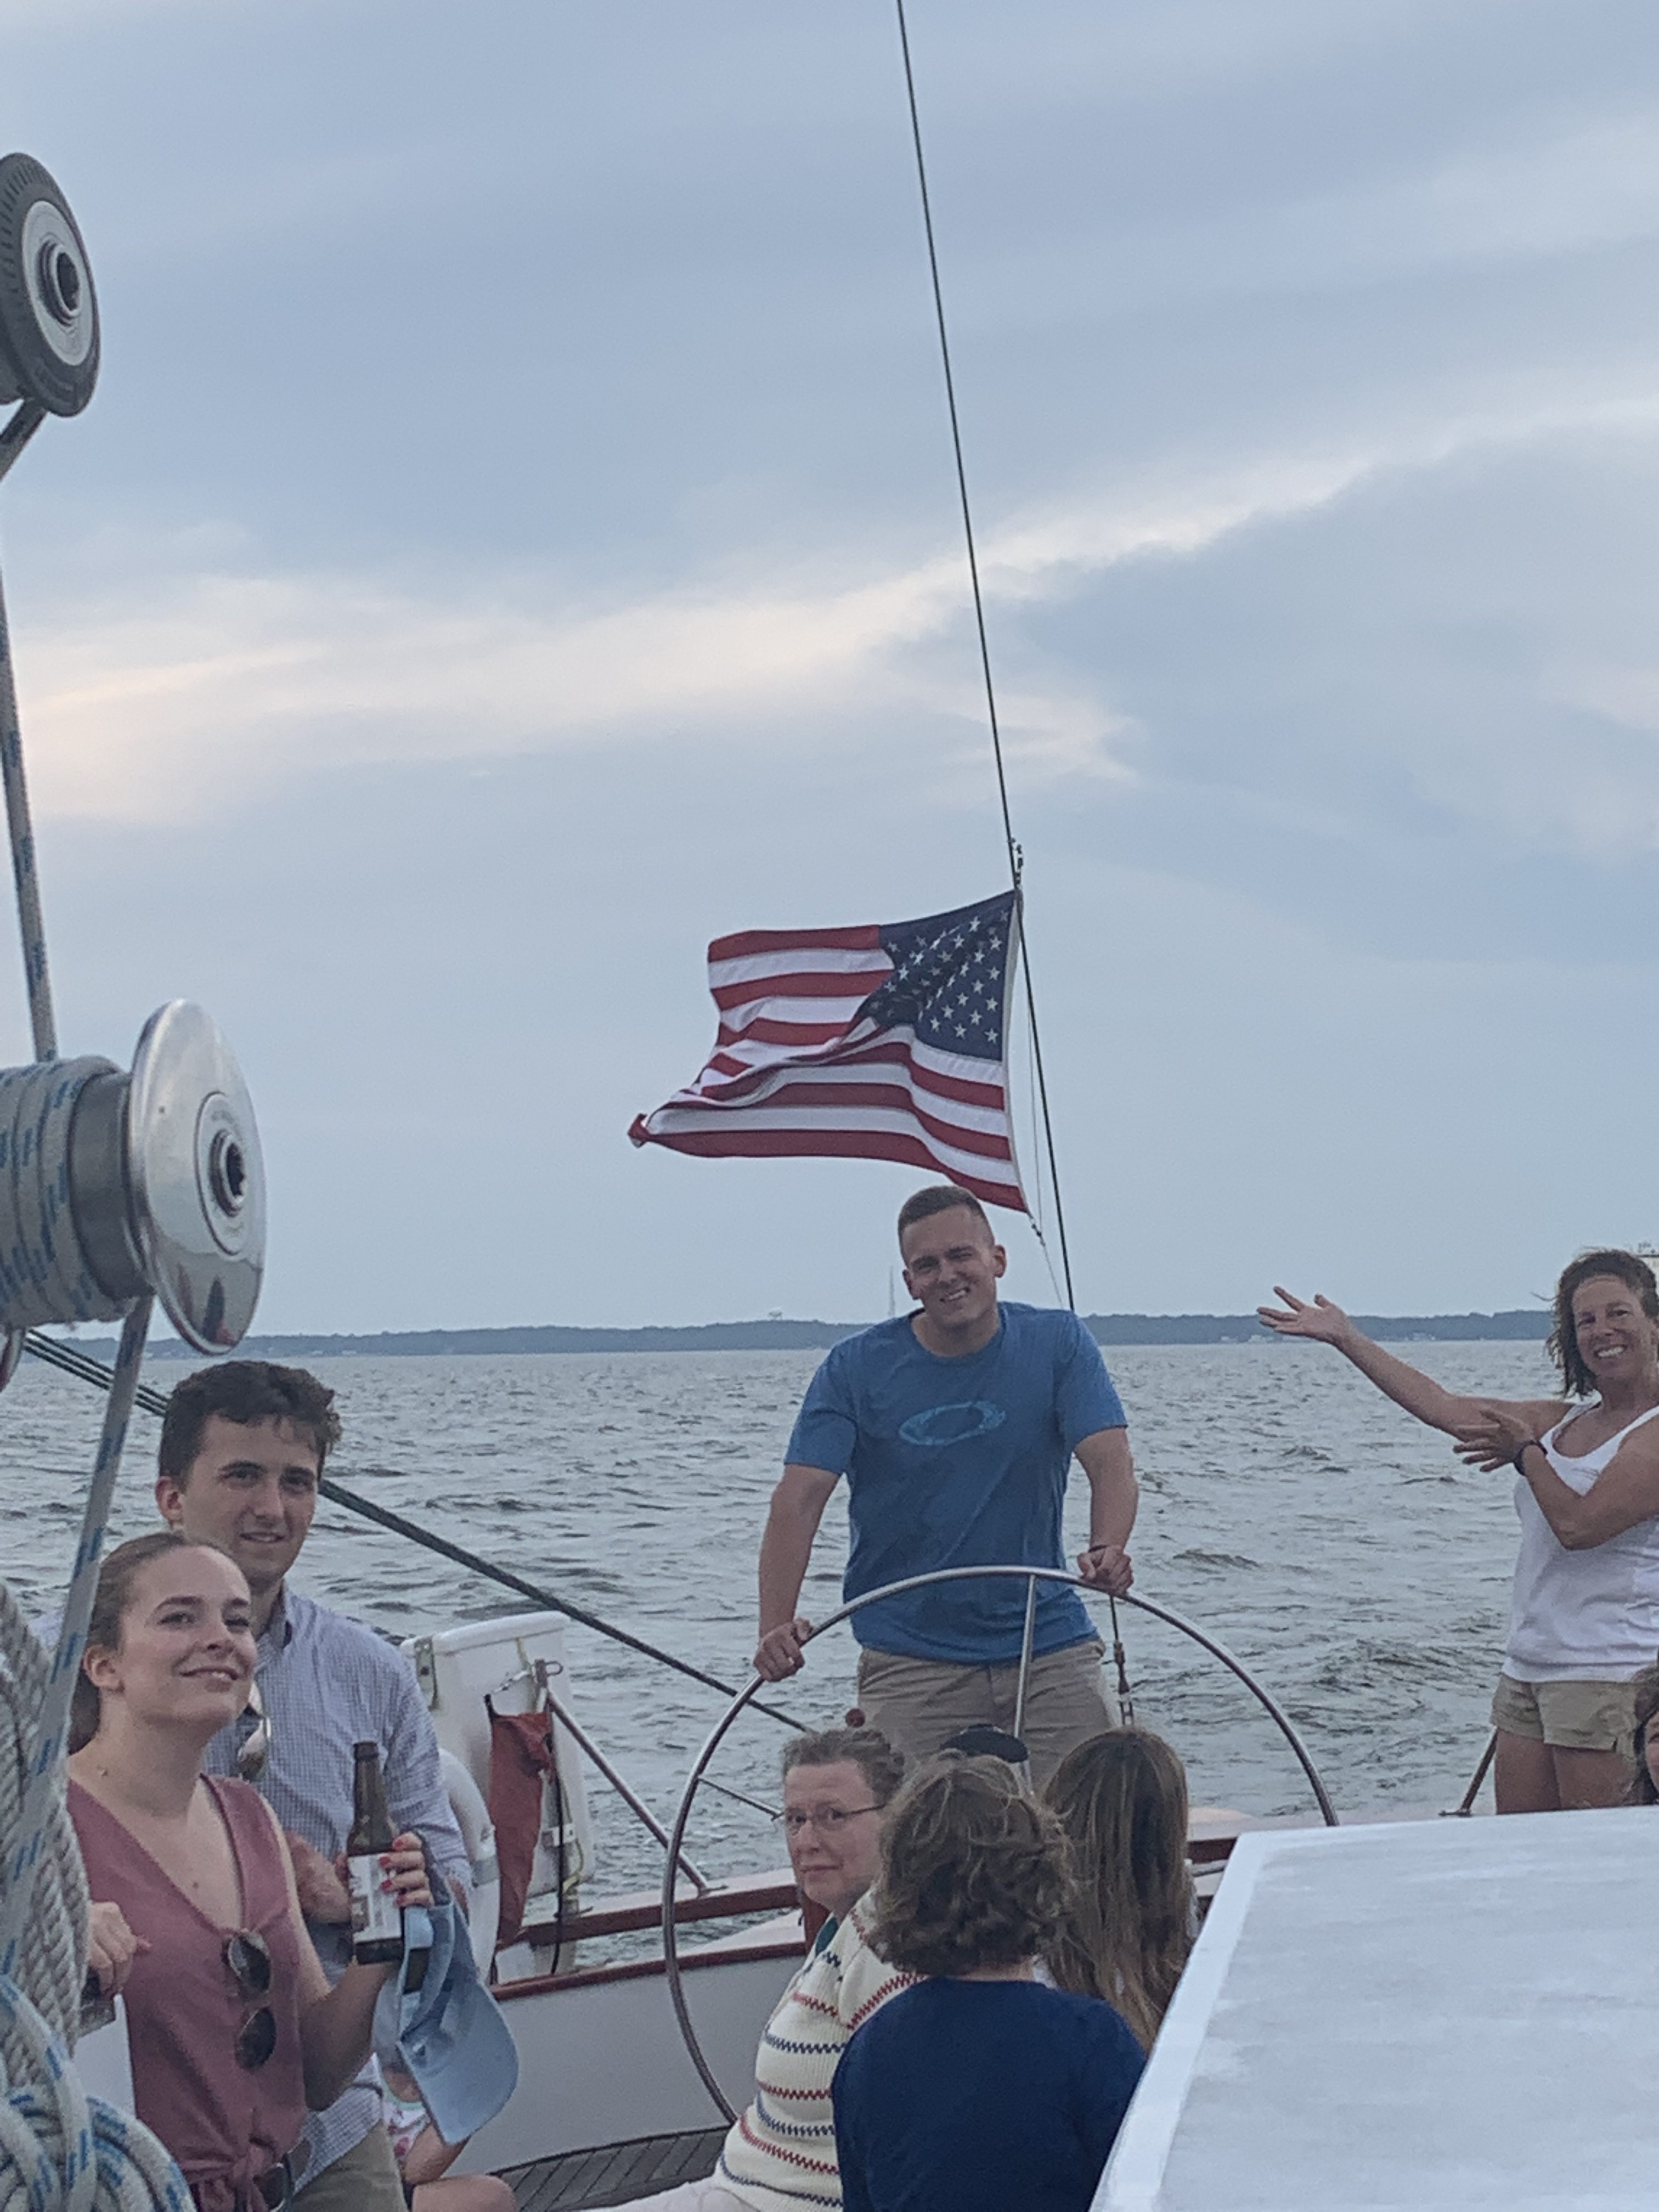 Man steering boat and smiling with American flag flying behind him